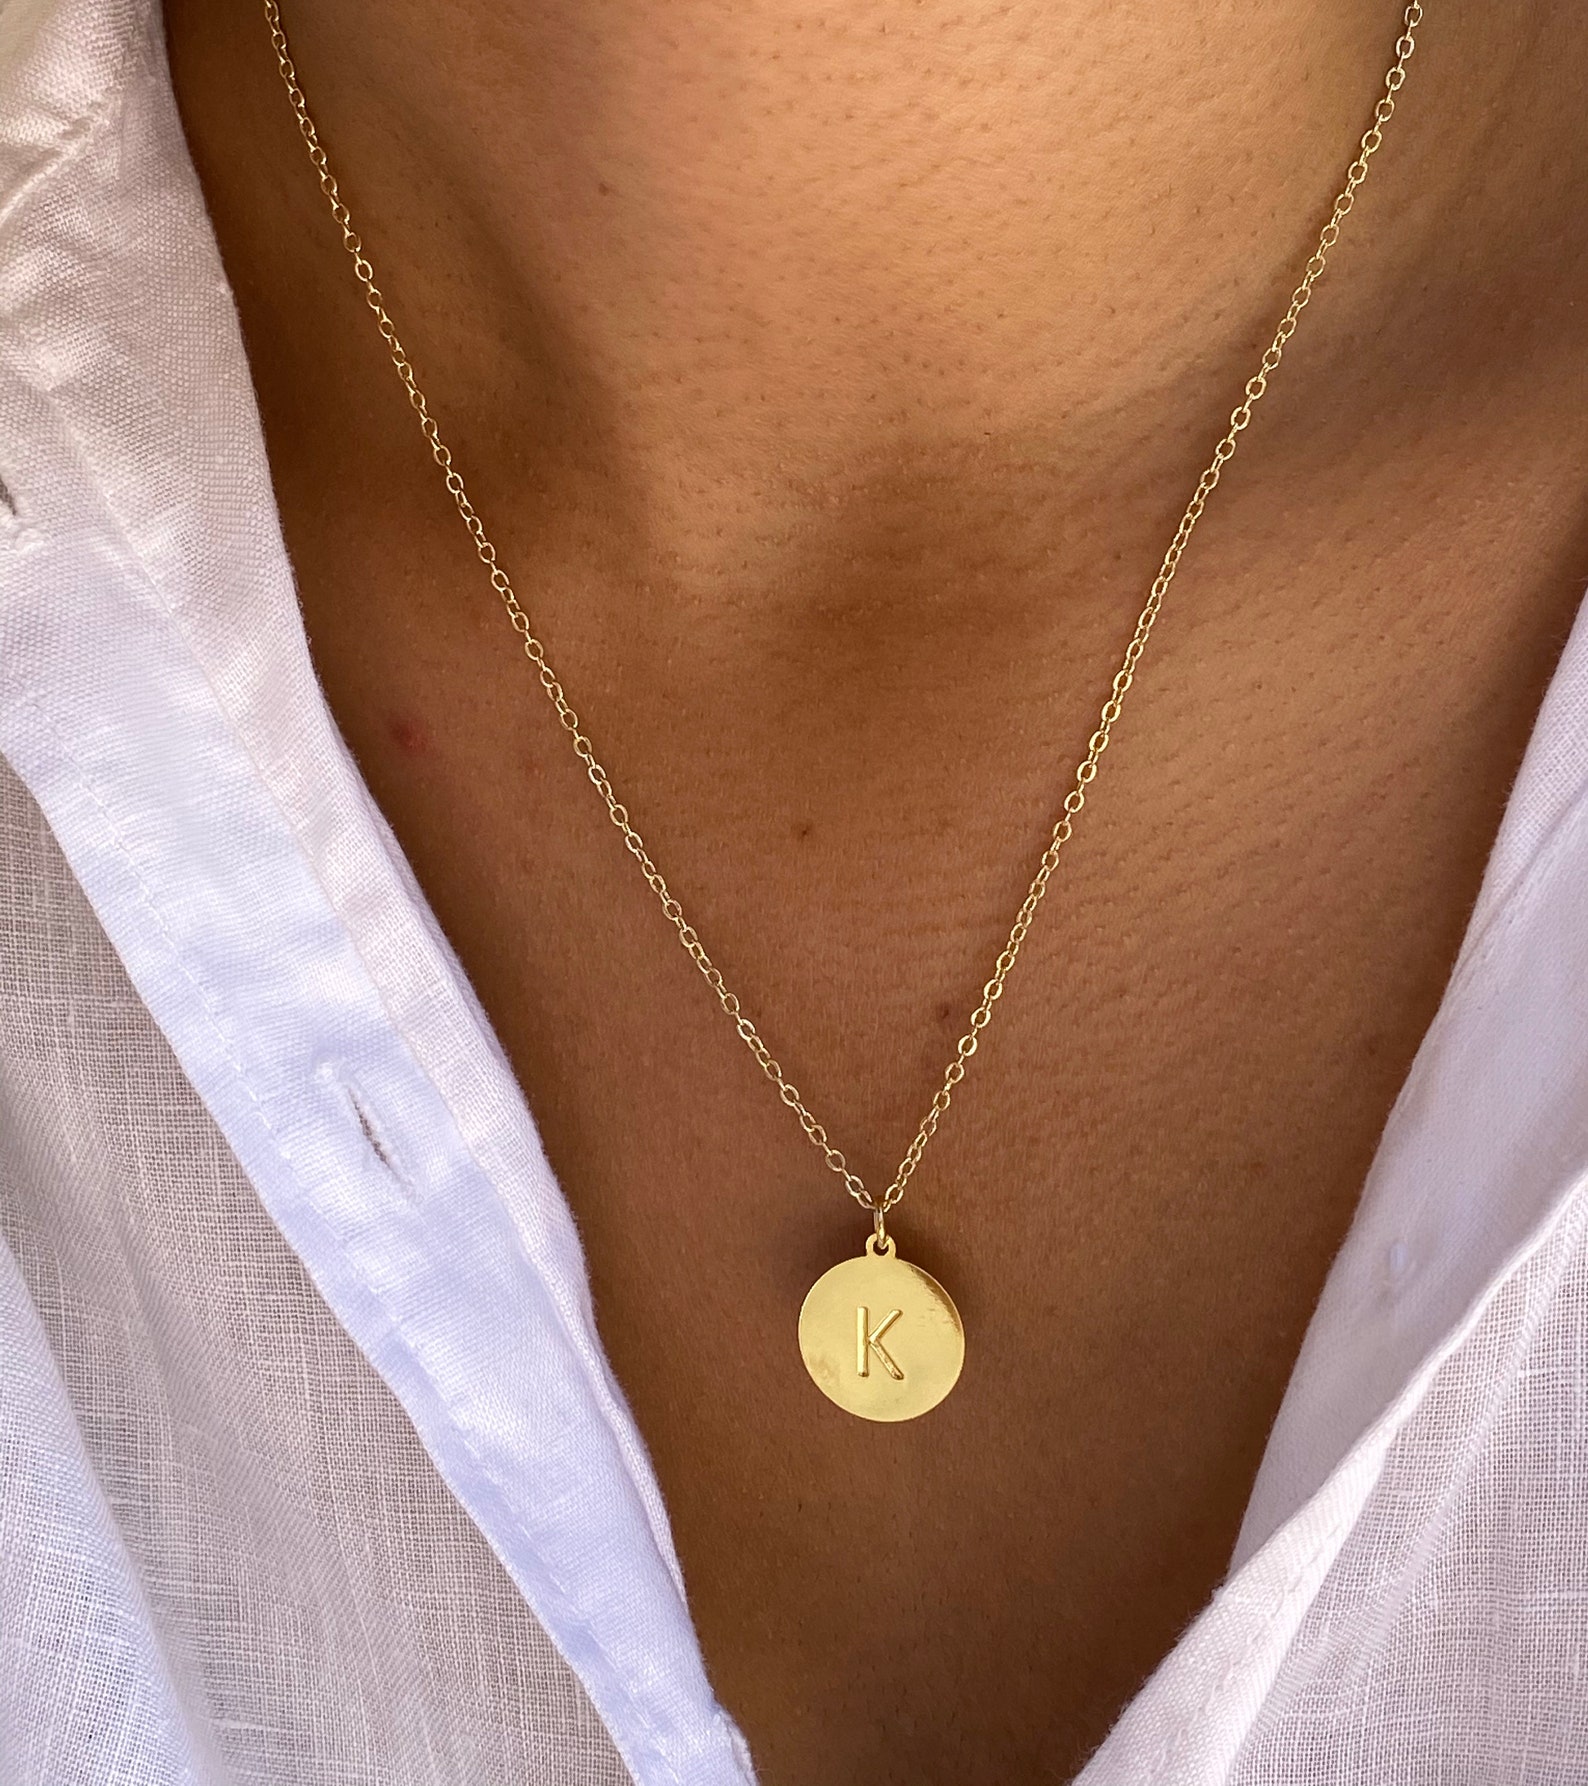 Initial Disc Necklace. 14k Gold Filled Necklace. Medium Size | Etsy